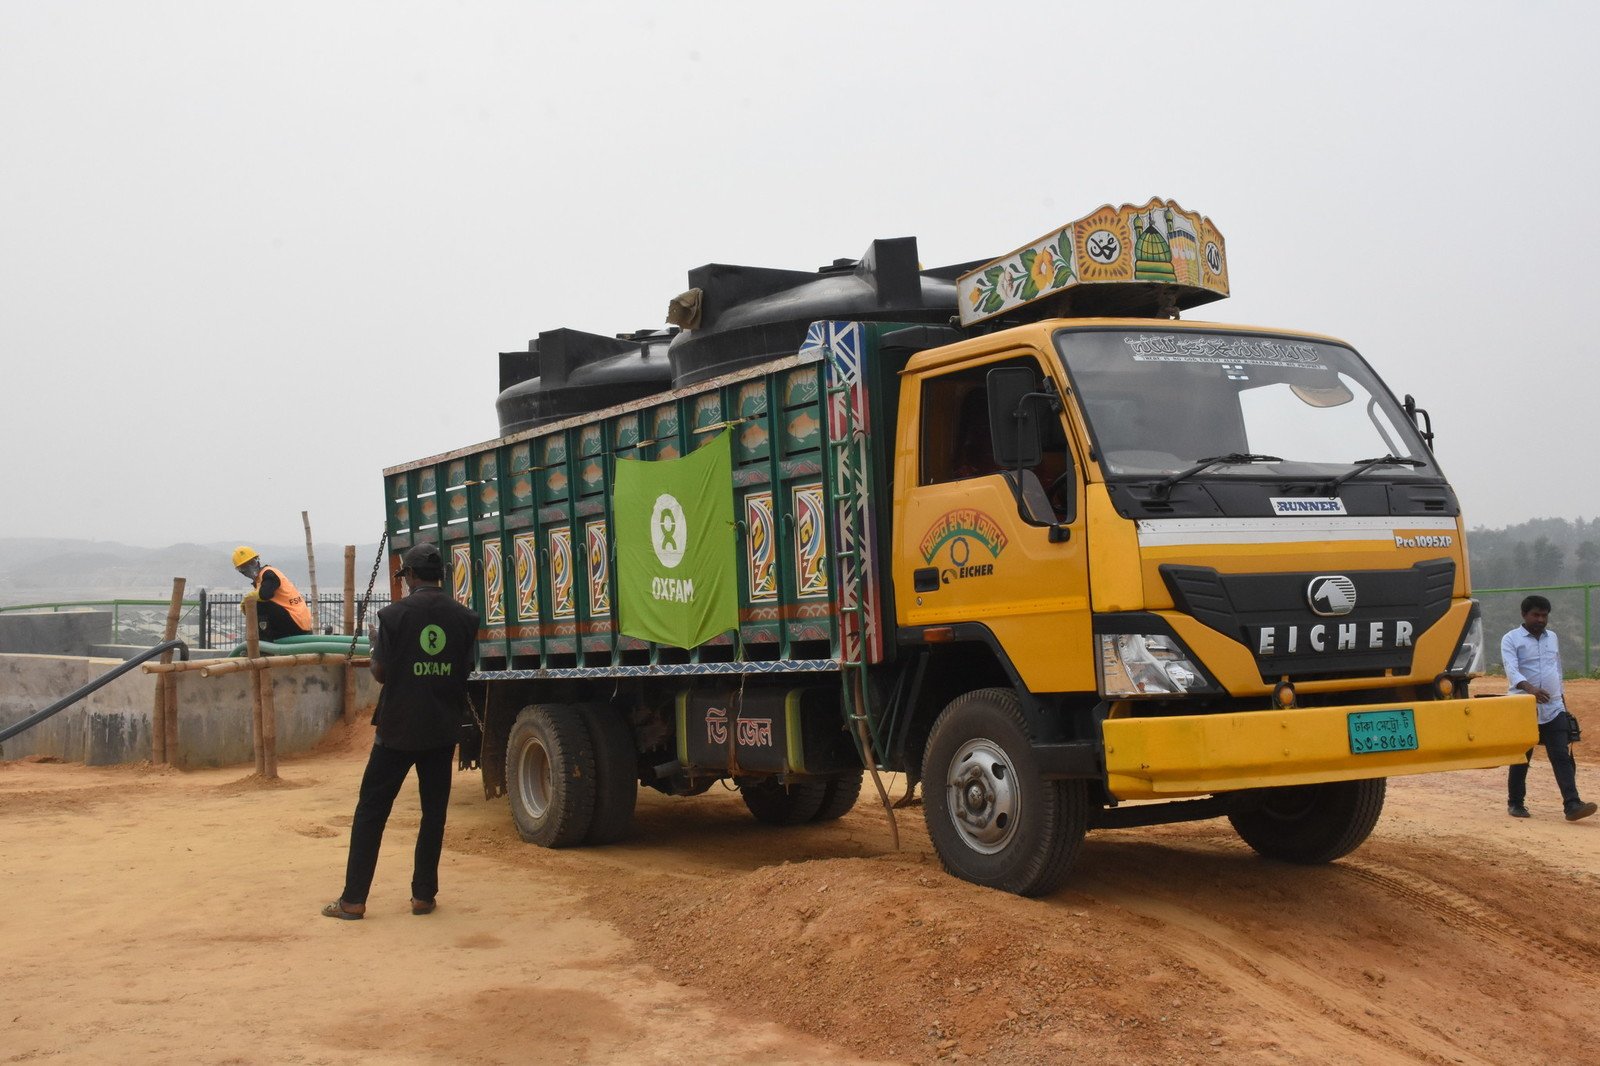 Oxfam’s staff are trucking waste from camp latrines to the treatment plant for safe disposal.